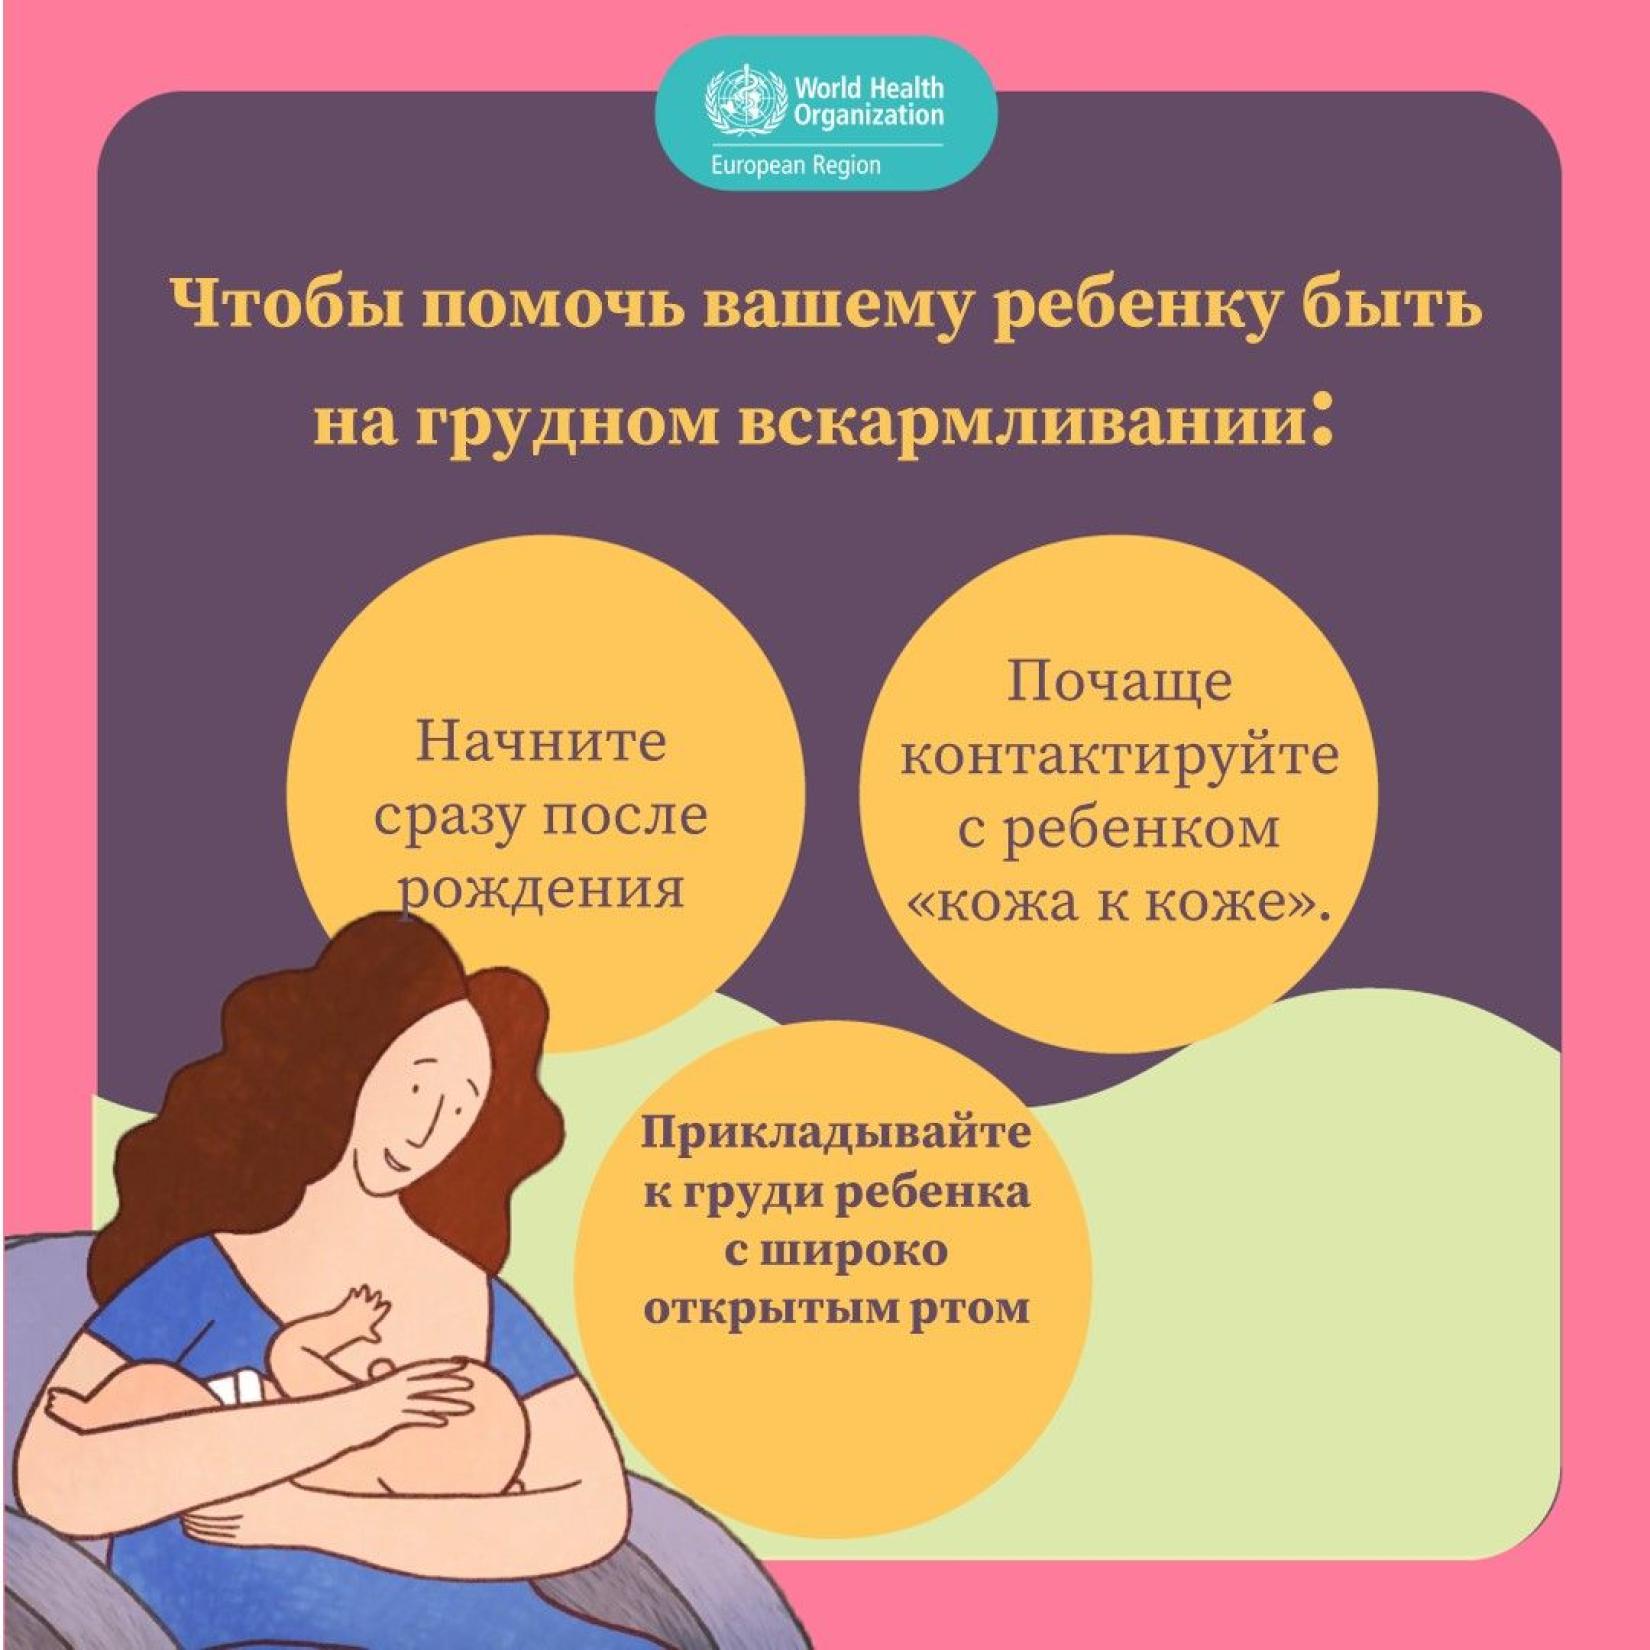 How to help your baby be breastfed